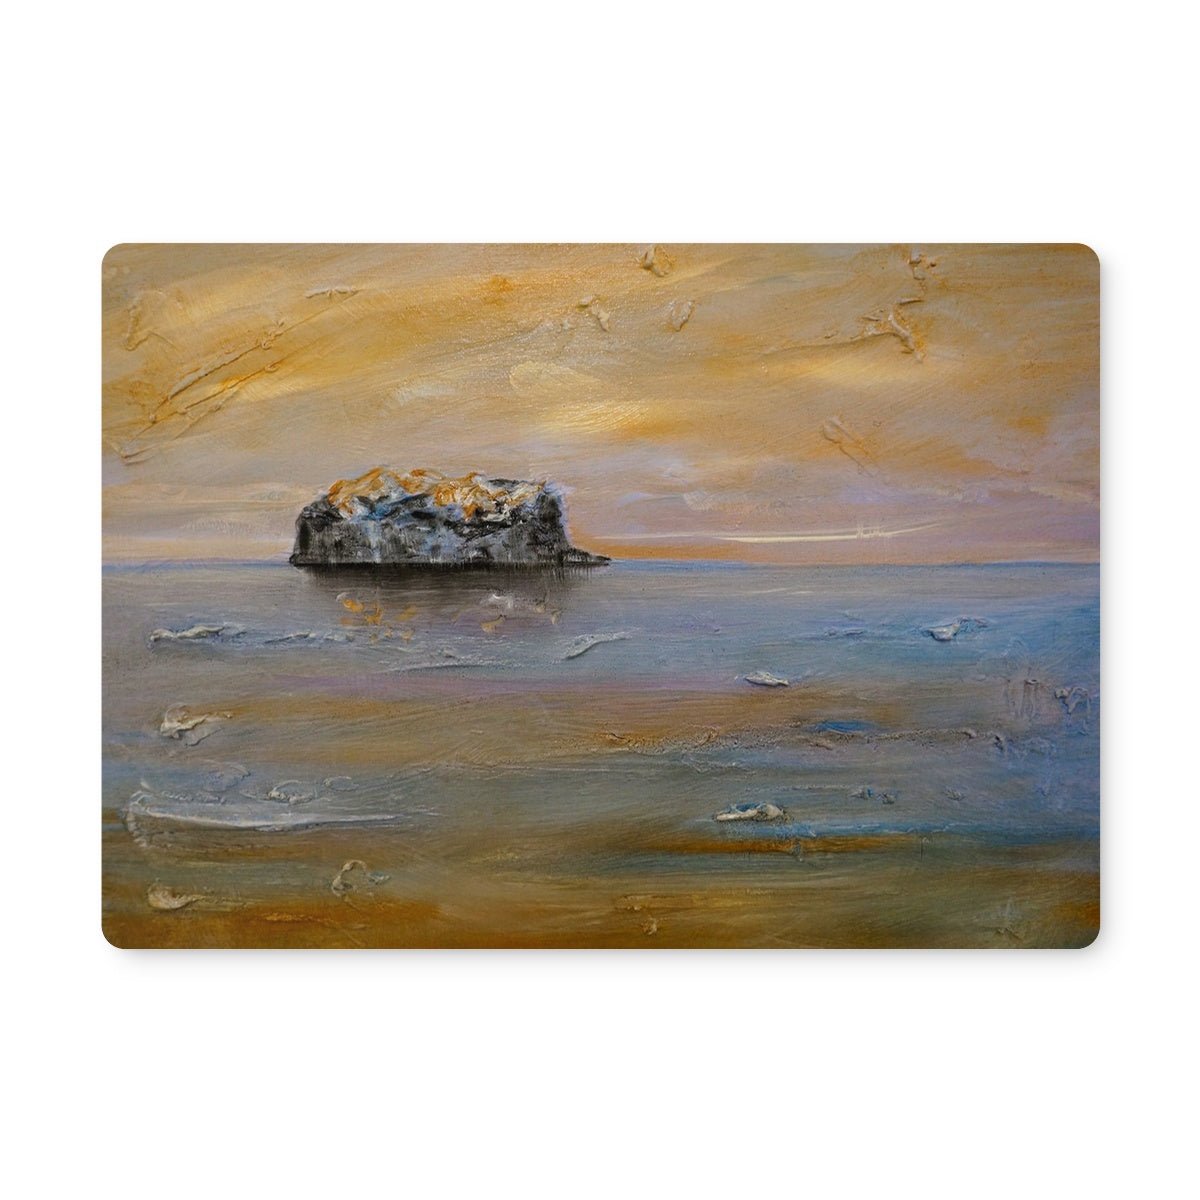 Bass Rock Dawn Art Gifts Placemat-Placemats-Edinburgh & Glasgow Art Gallery-2 Placemats-Paintings, Prints, Homeware, Art Gifts From Scotland By Scottish Artist Kevin Hunter